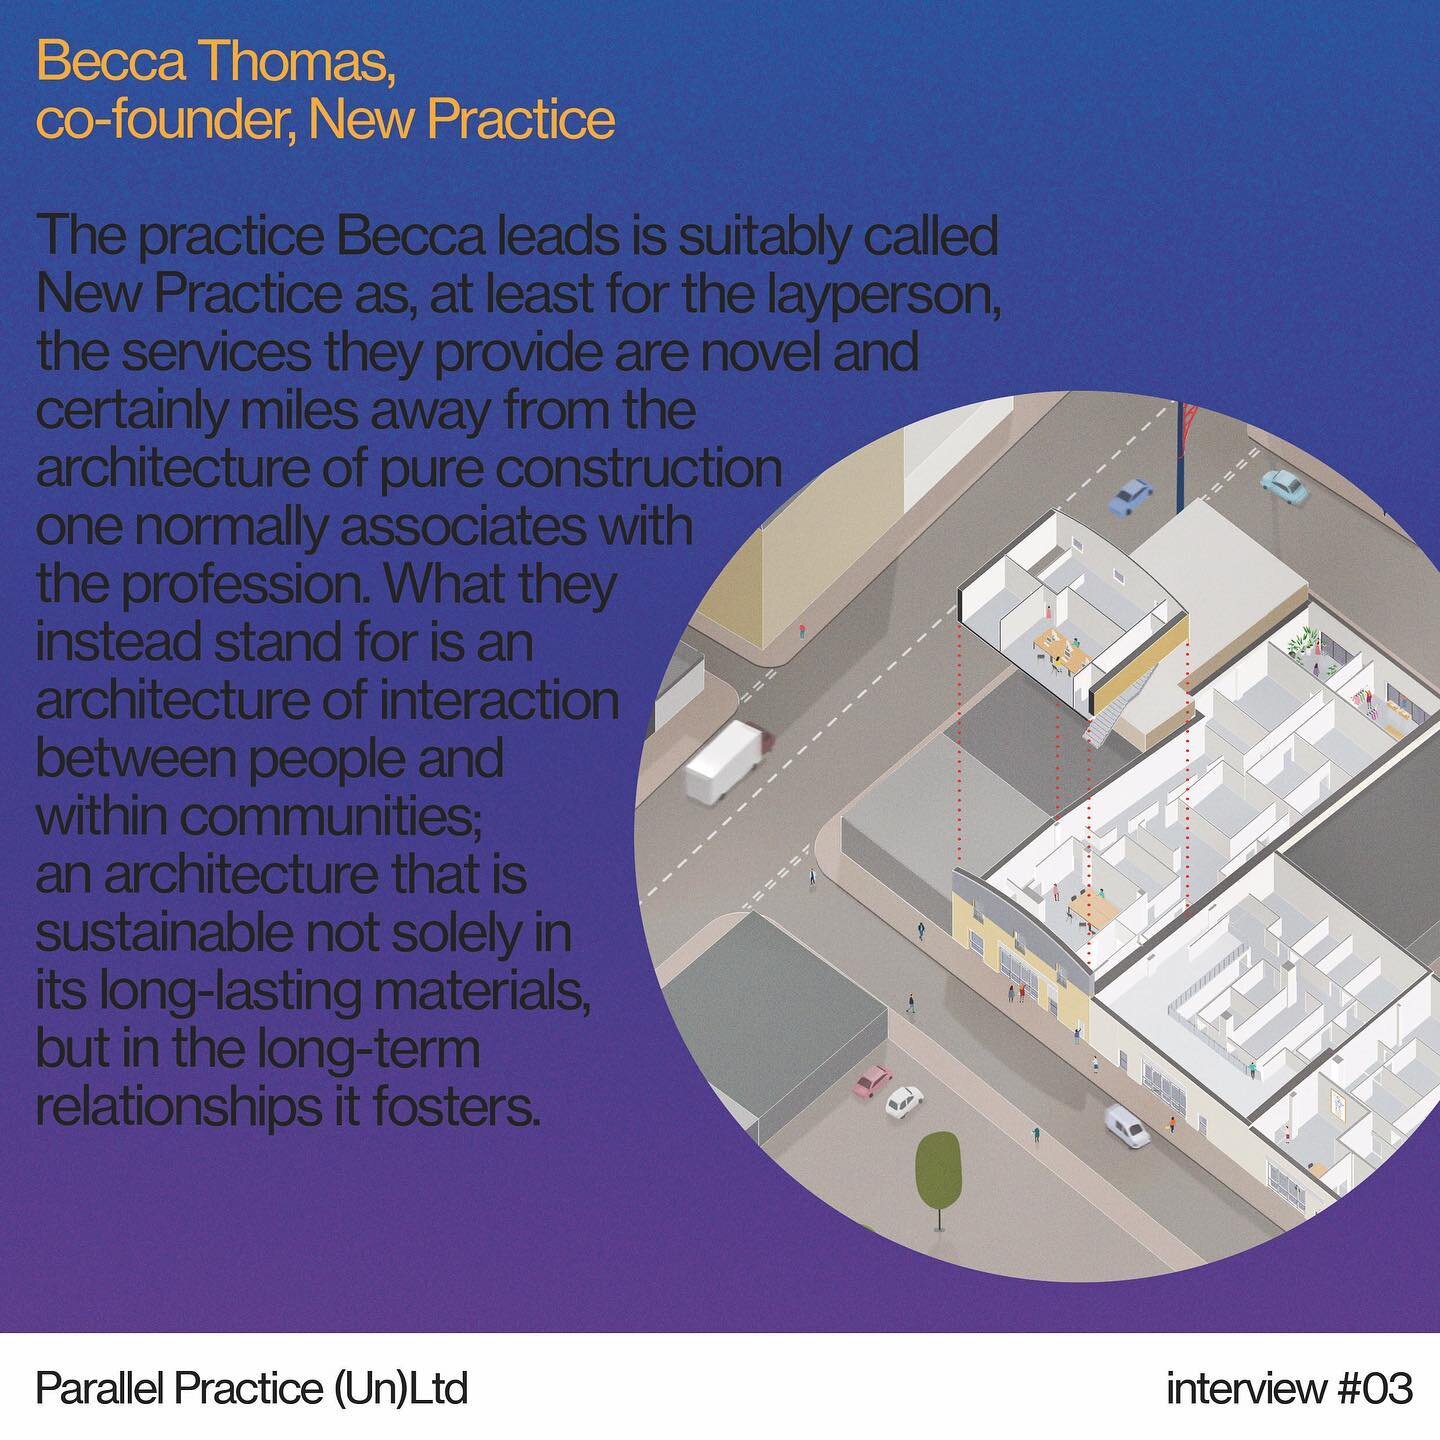 @aoifeblathnaid and @carl.brink spoke with Becca Thomas of @_newpractice for our third interview that will be published together with our findings 🎙

Image via new-practice.co.uk

#slashother #ismmagazine #architecture #design #artist #art #archifri